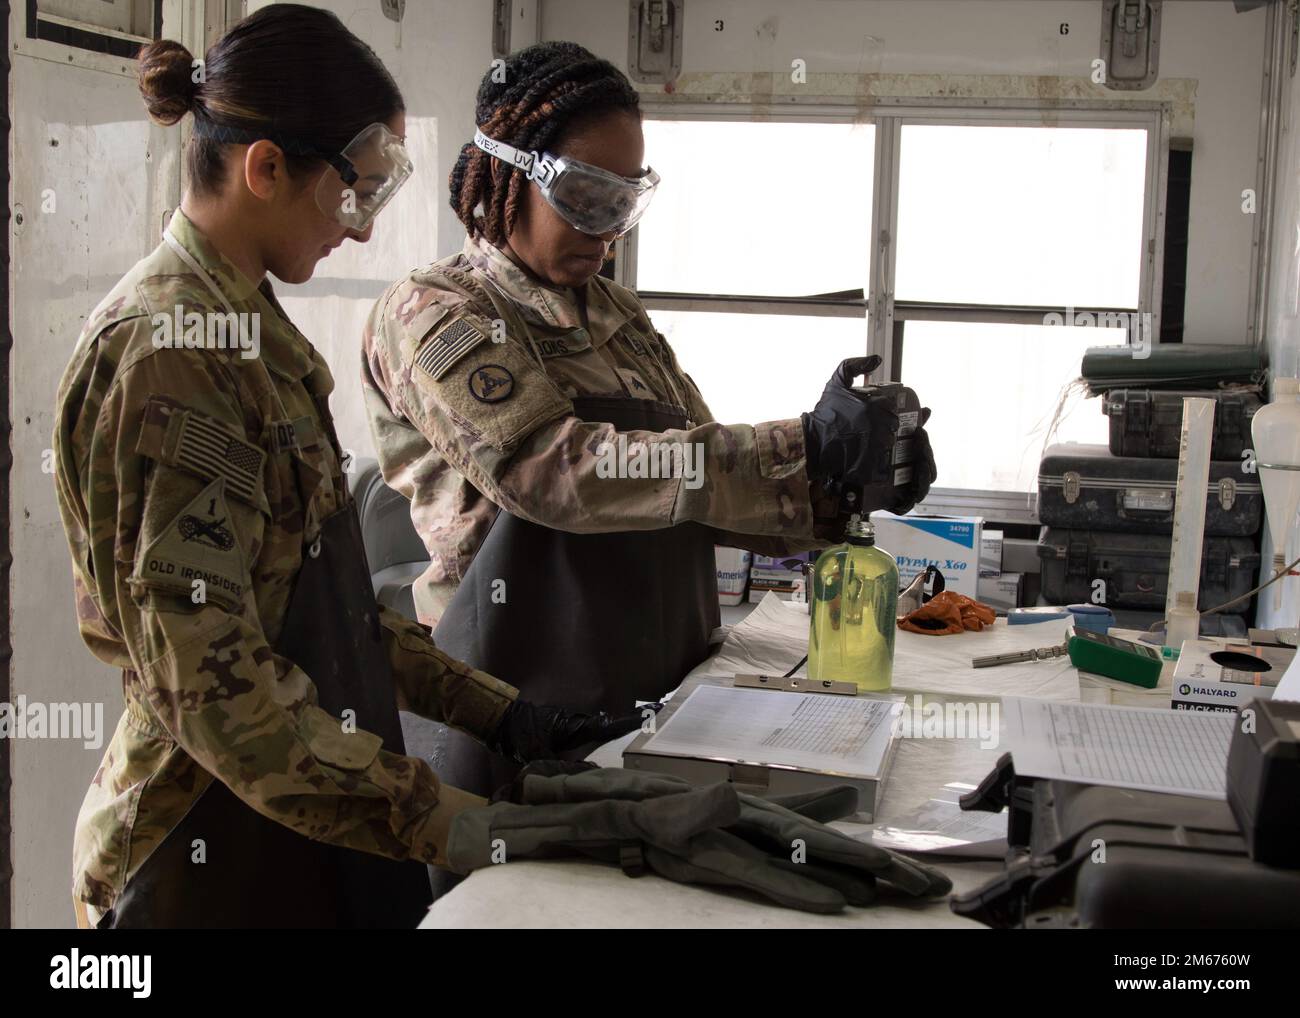 Sgt. Shandora R. Brooks, right, takes a fuel sample for testing while Spc. Mariah N. Lopez observes during a fueling mission on Erbil Air Base, Iraq, April 9, 2022. Brooks, a petroleum laboratory specialist, is assigned to 264th Combat Sustainment Support Battalion, and has been deployed with the unit since September of 2021. Stock Photo